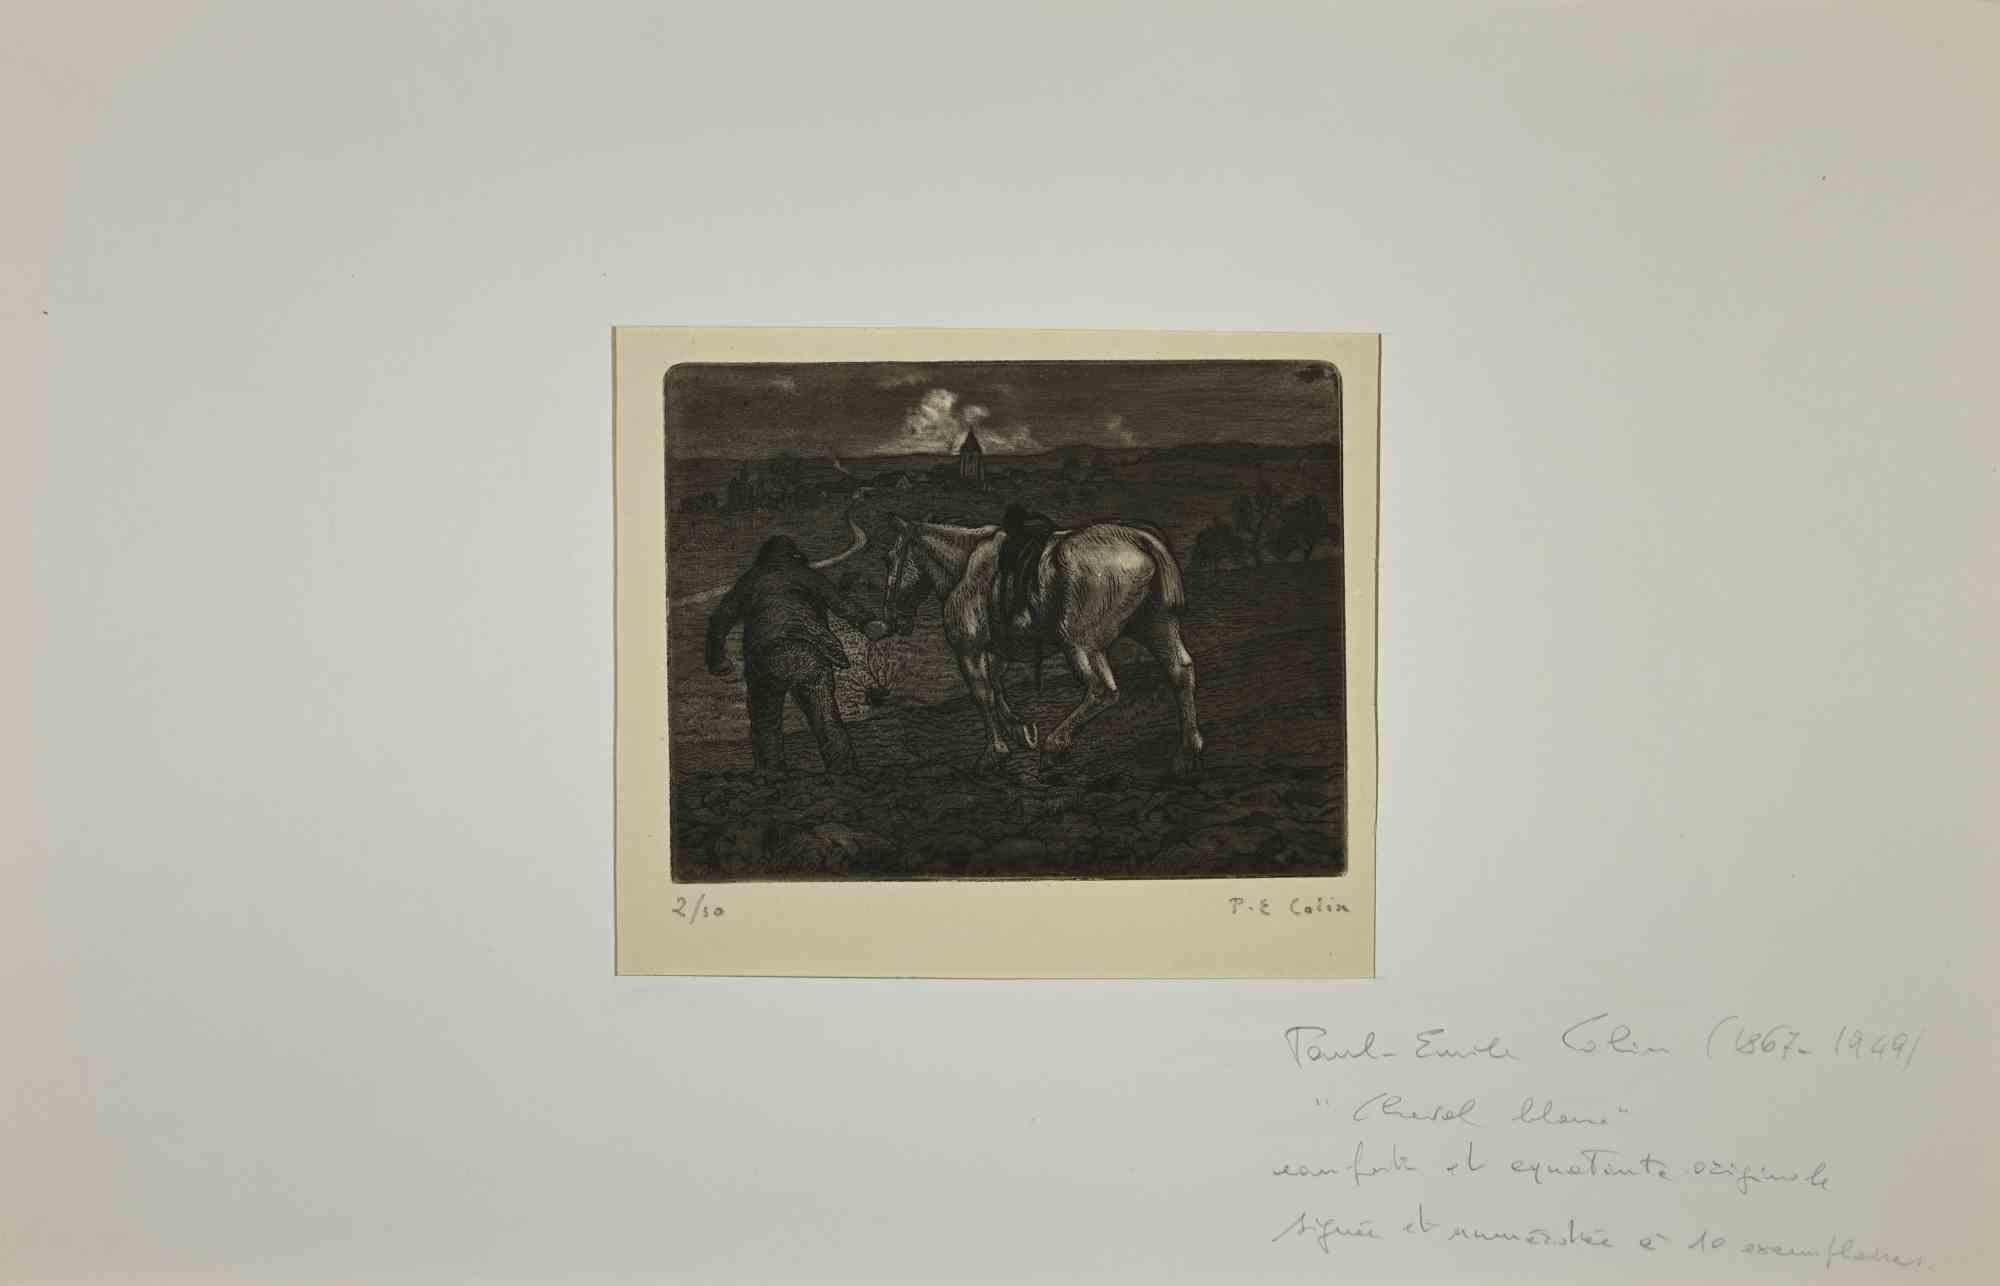 Le Cheval Blanc is an artwok realized in early-20th century, by the French Artist Paul Emile Colin .

Black and white etching on paper. Hand Signed on the right corner. Limited edition of 50, ex. n. 2 

The artwork is attached on passepartout: